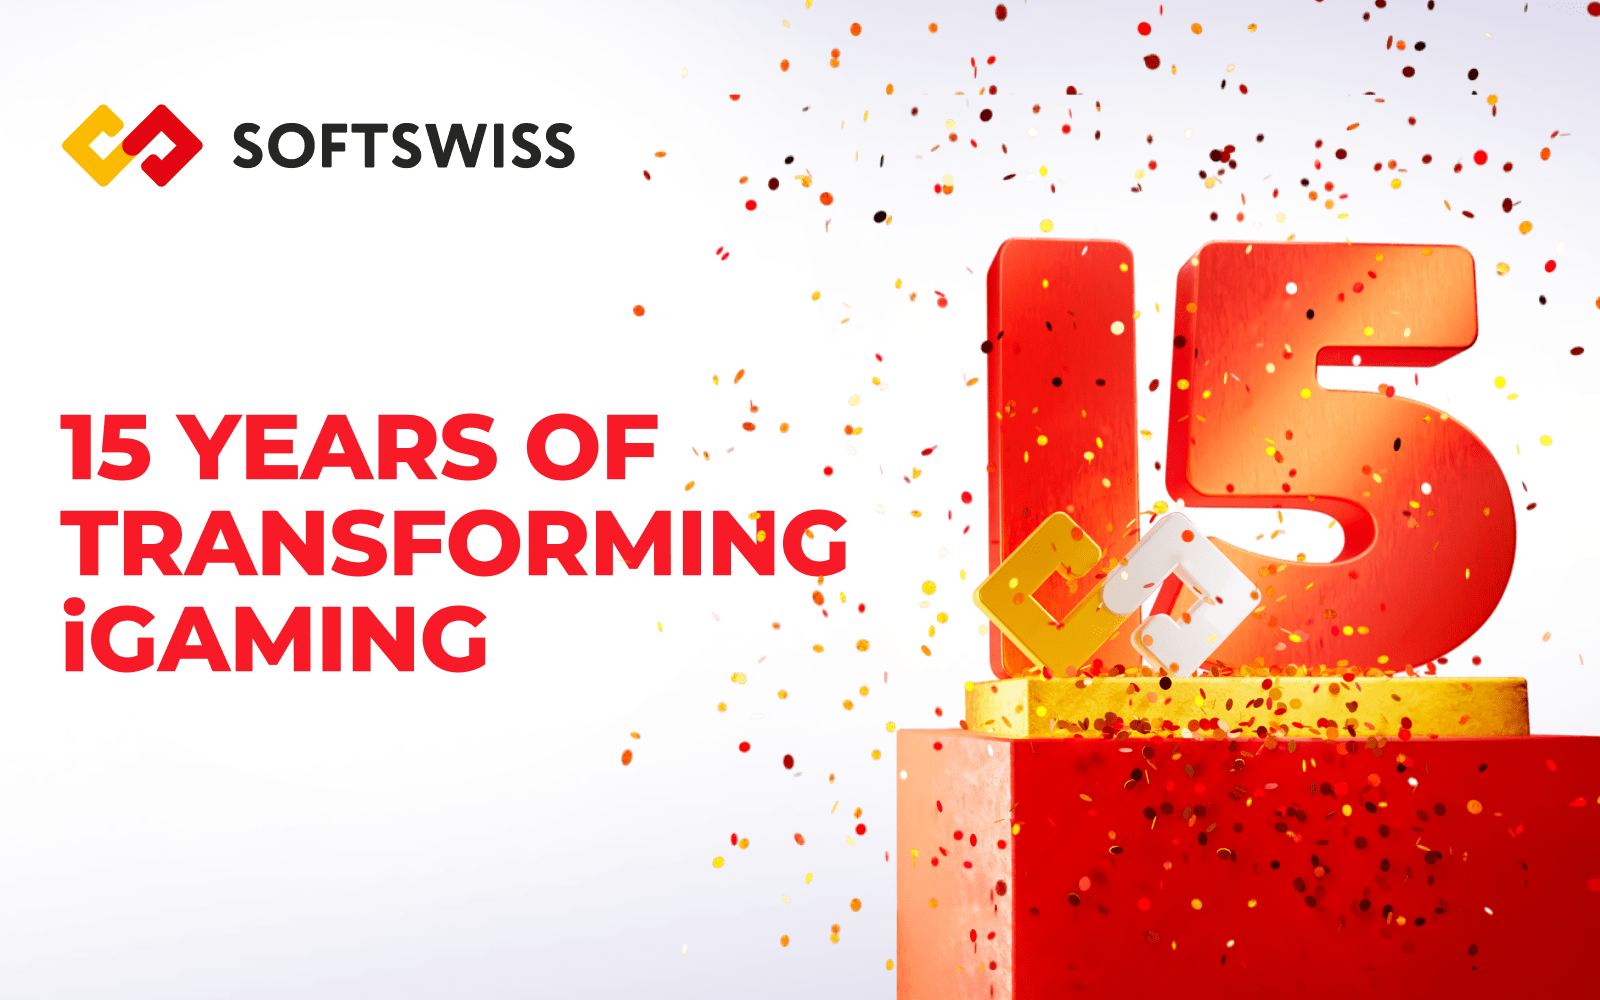 SOFTSWISS Celebrates 15th Anniversary: How Company Transformed iGaming?